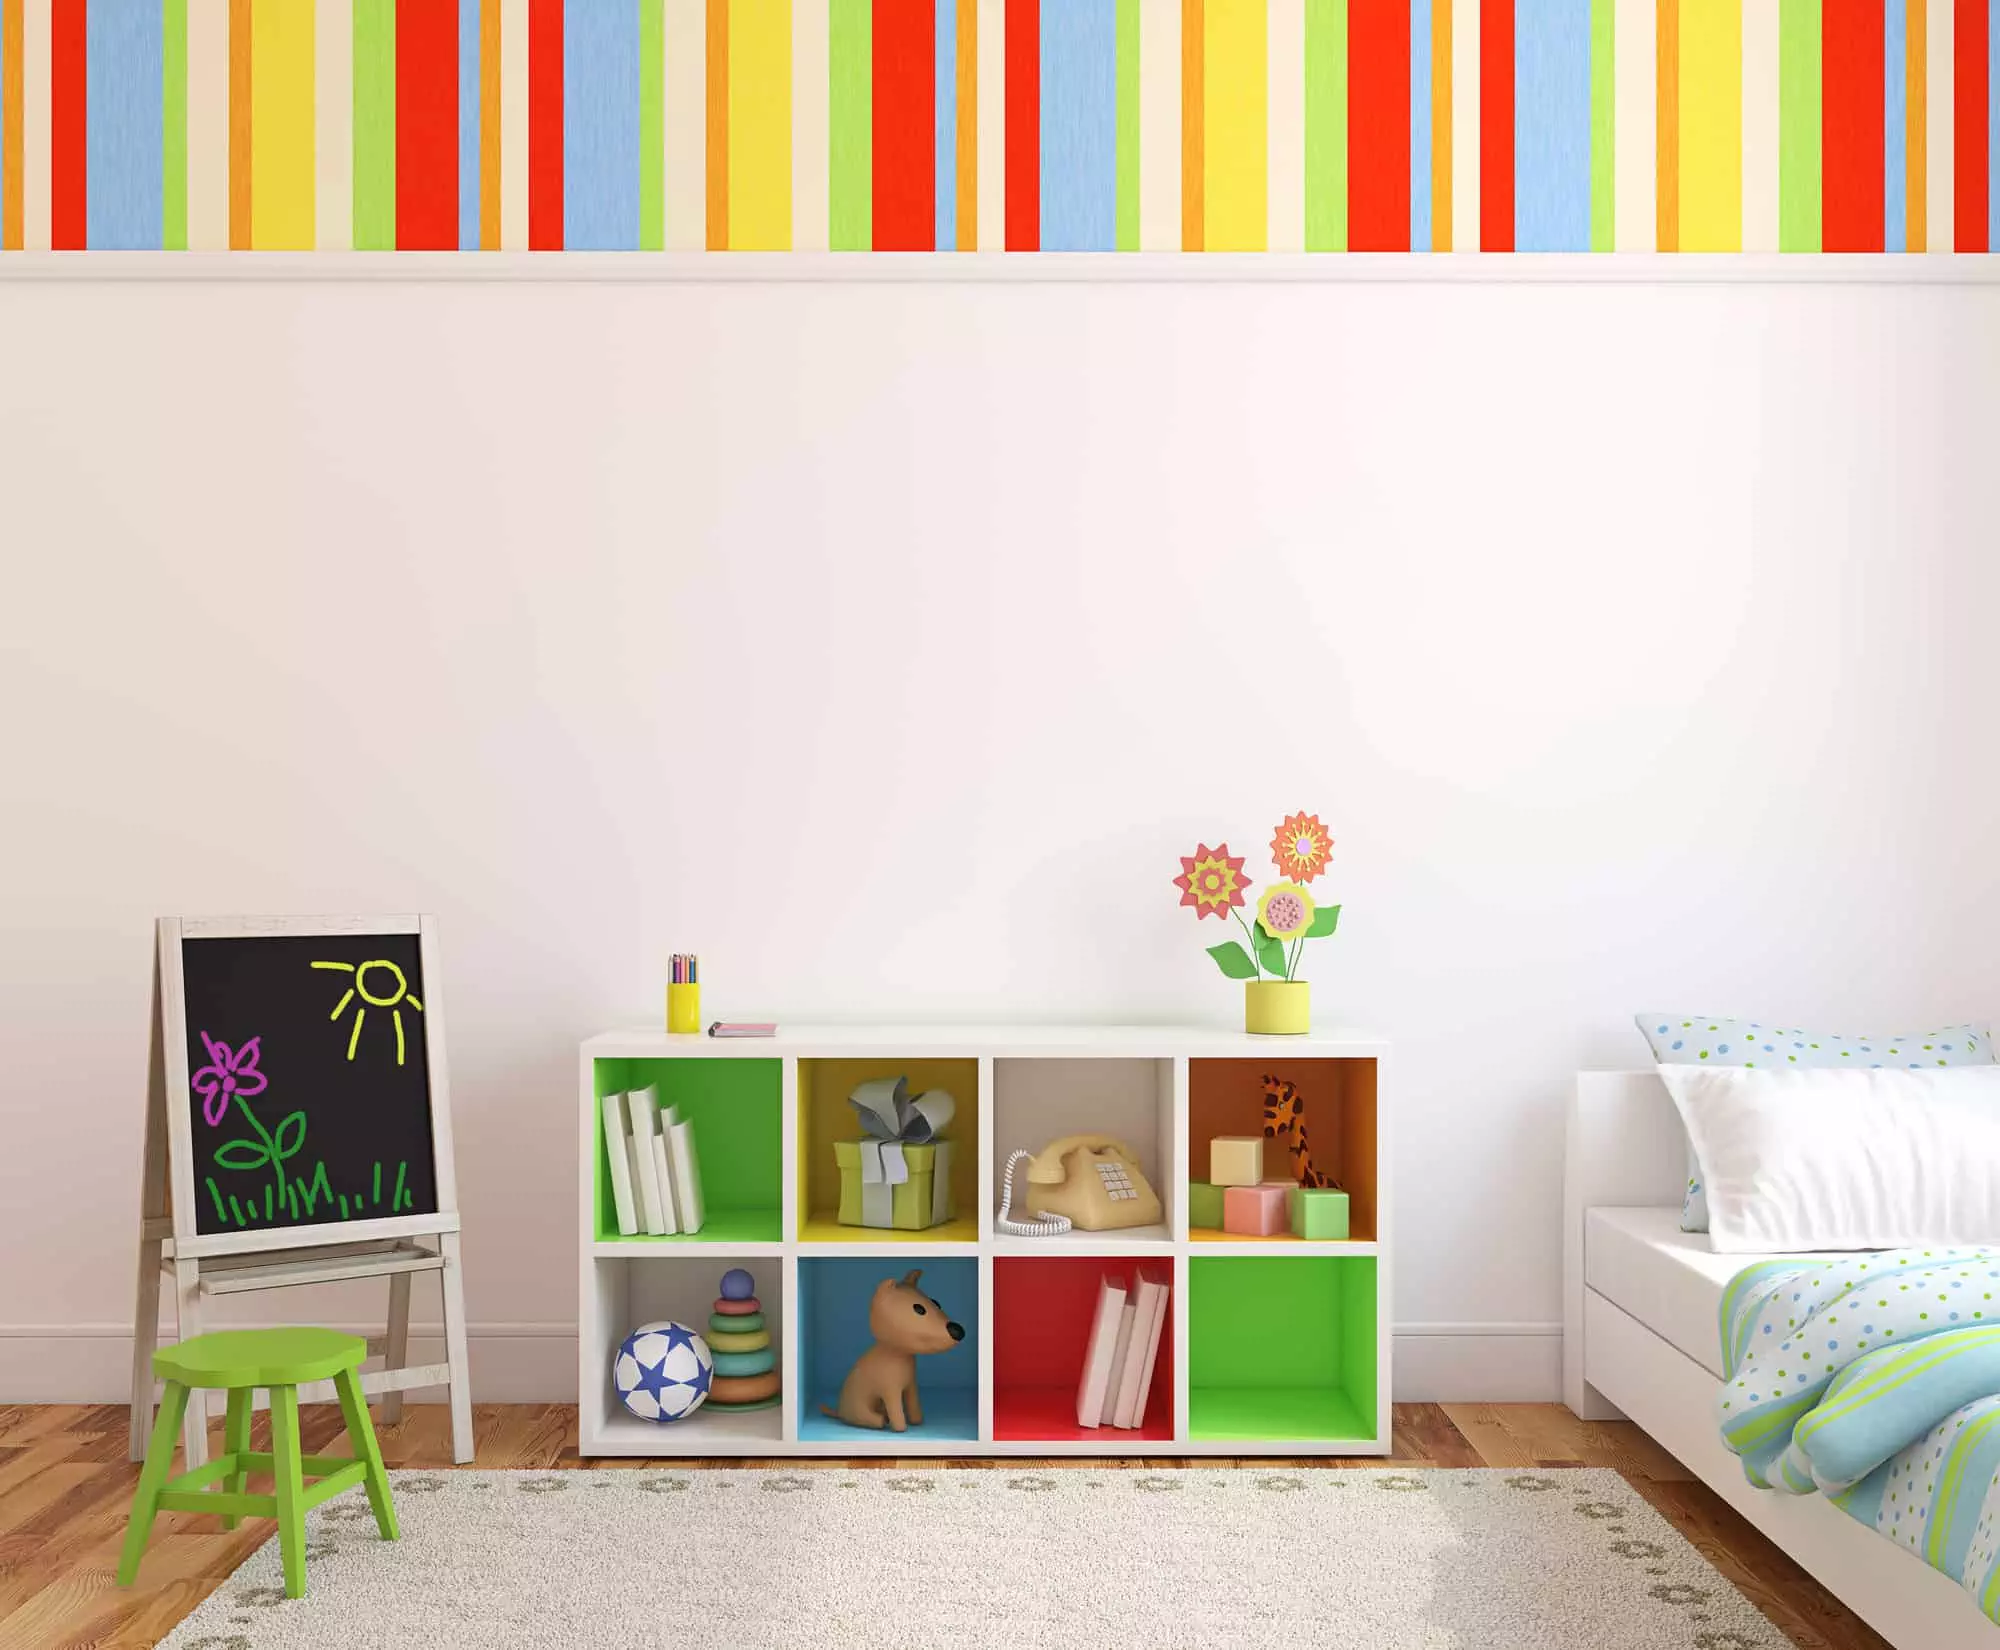 image of a clean and organized playroom as an example of how to get organized for the new year